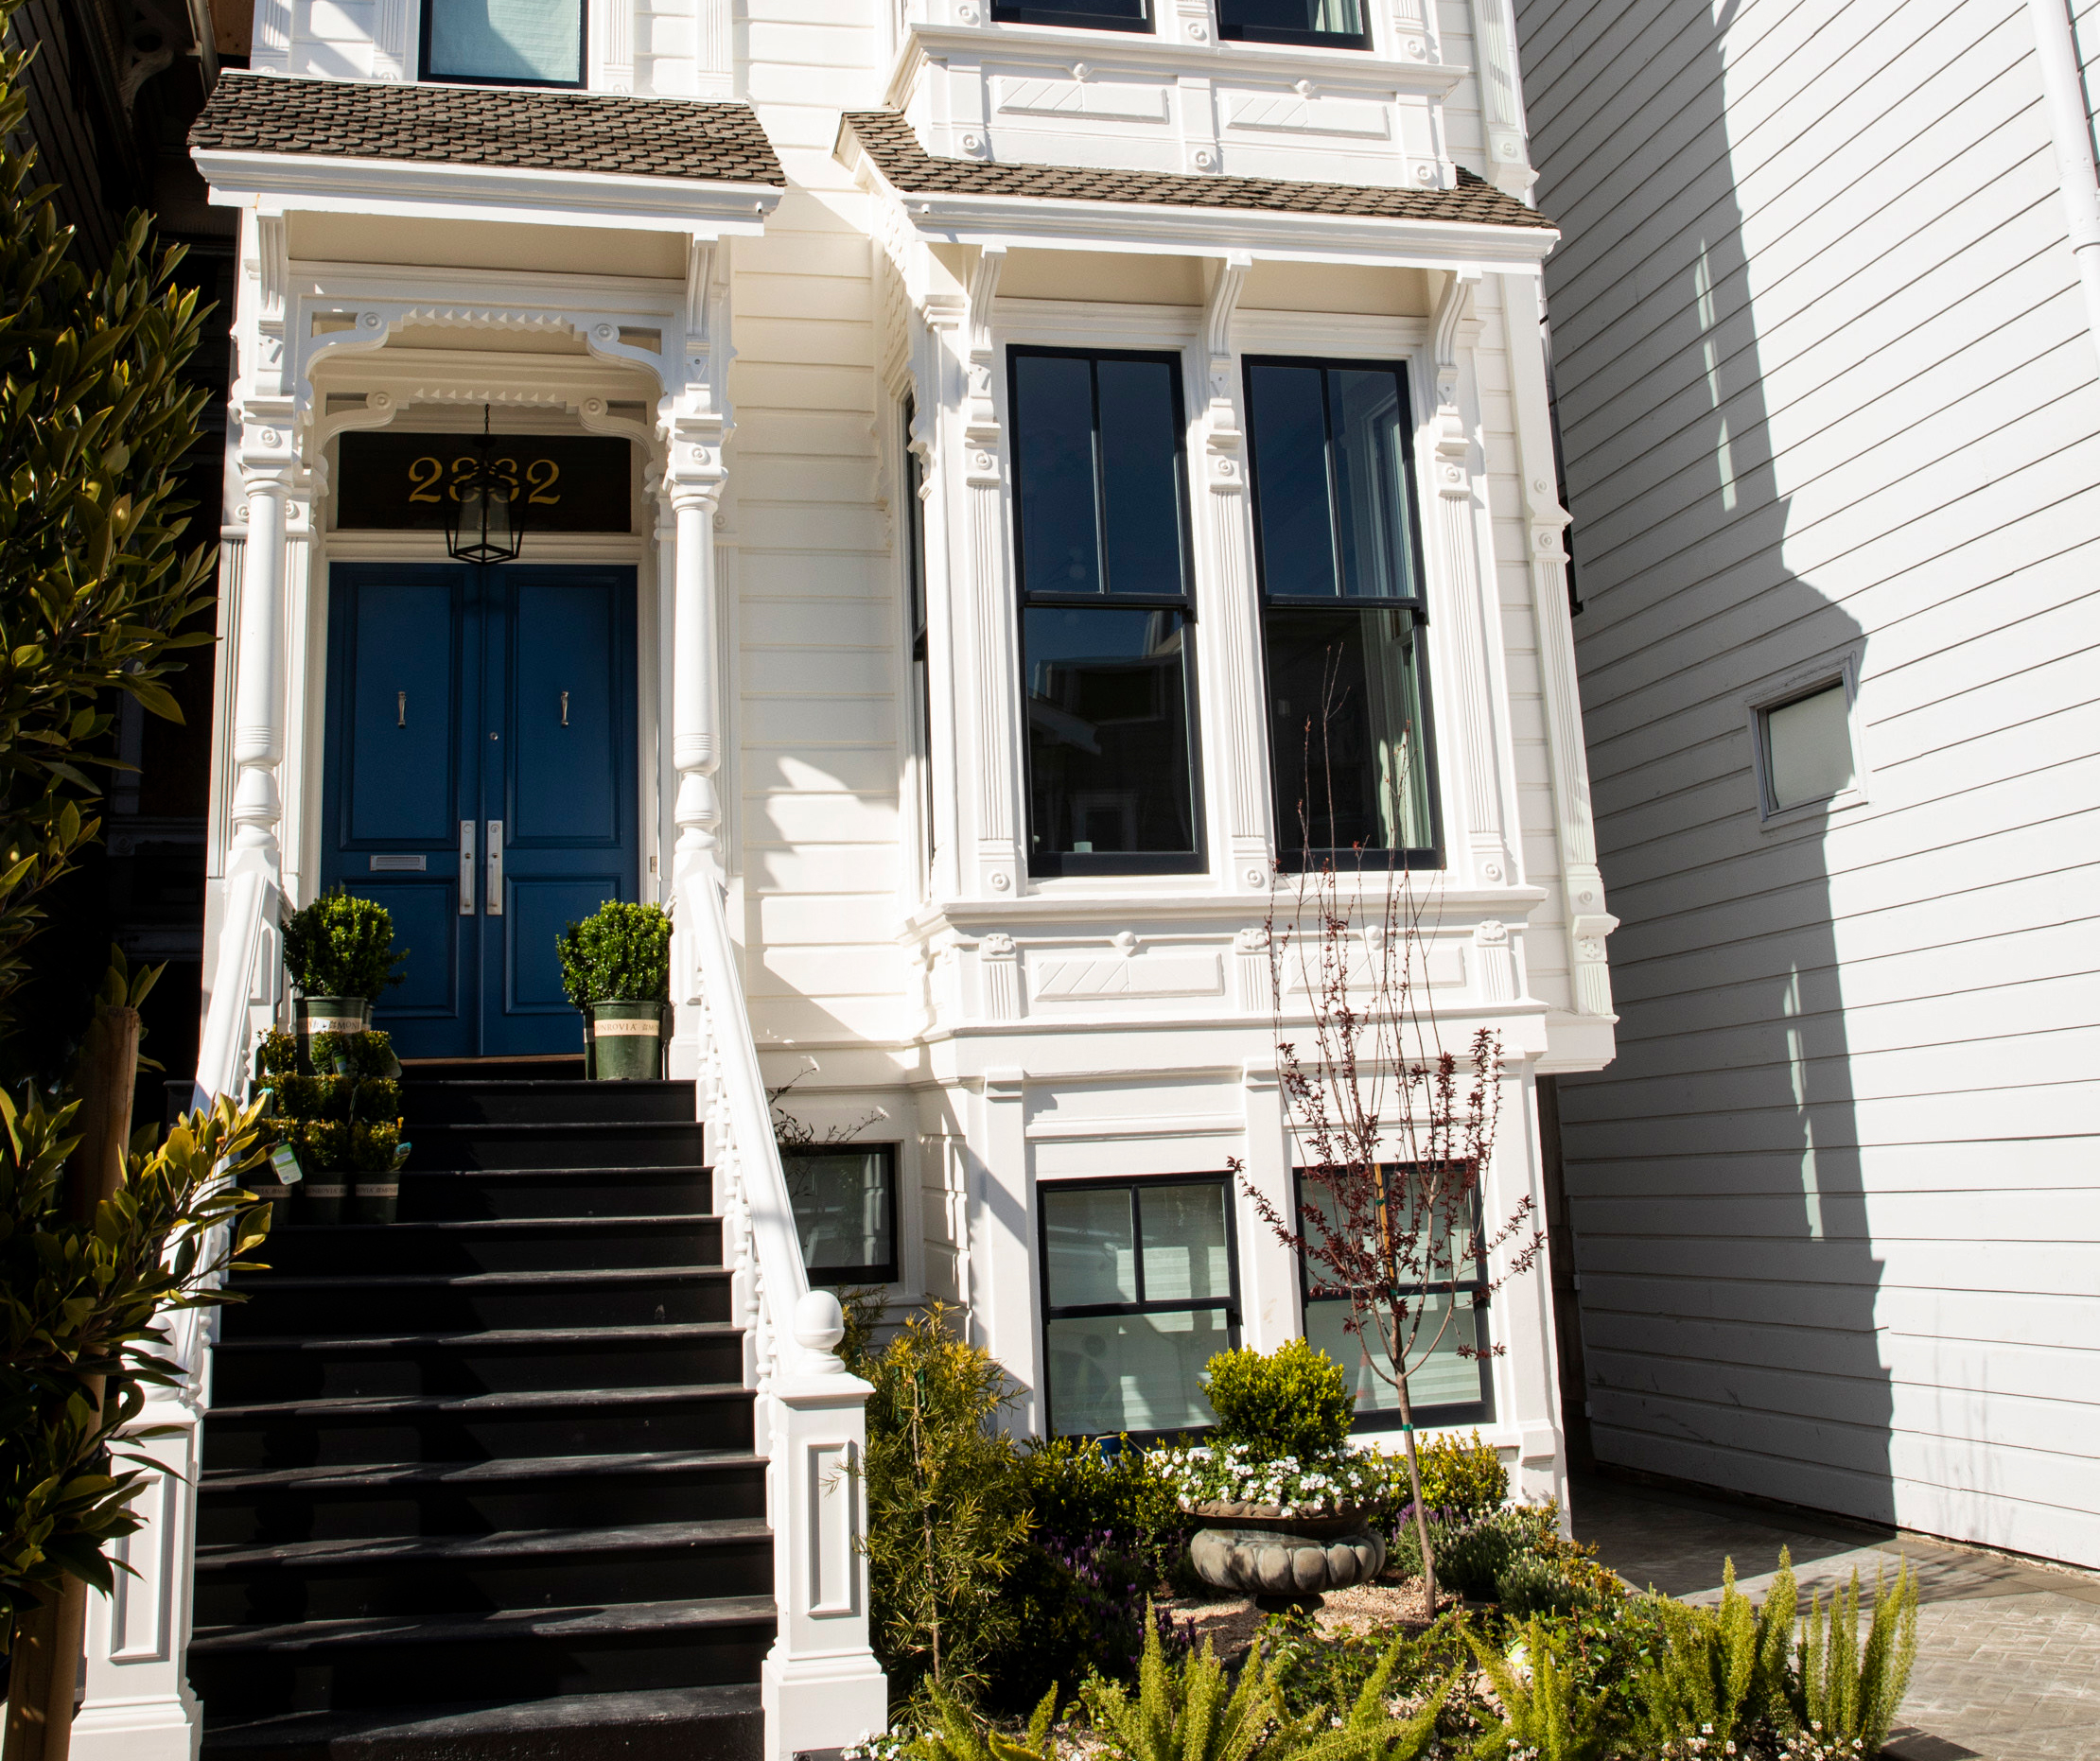 Property Photo: Front exterior of 2862 Bush street, showing a beautiful Victorian home